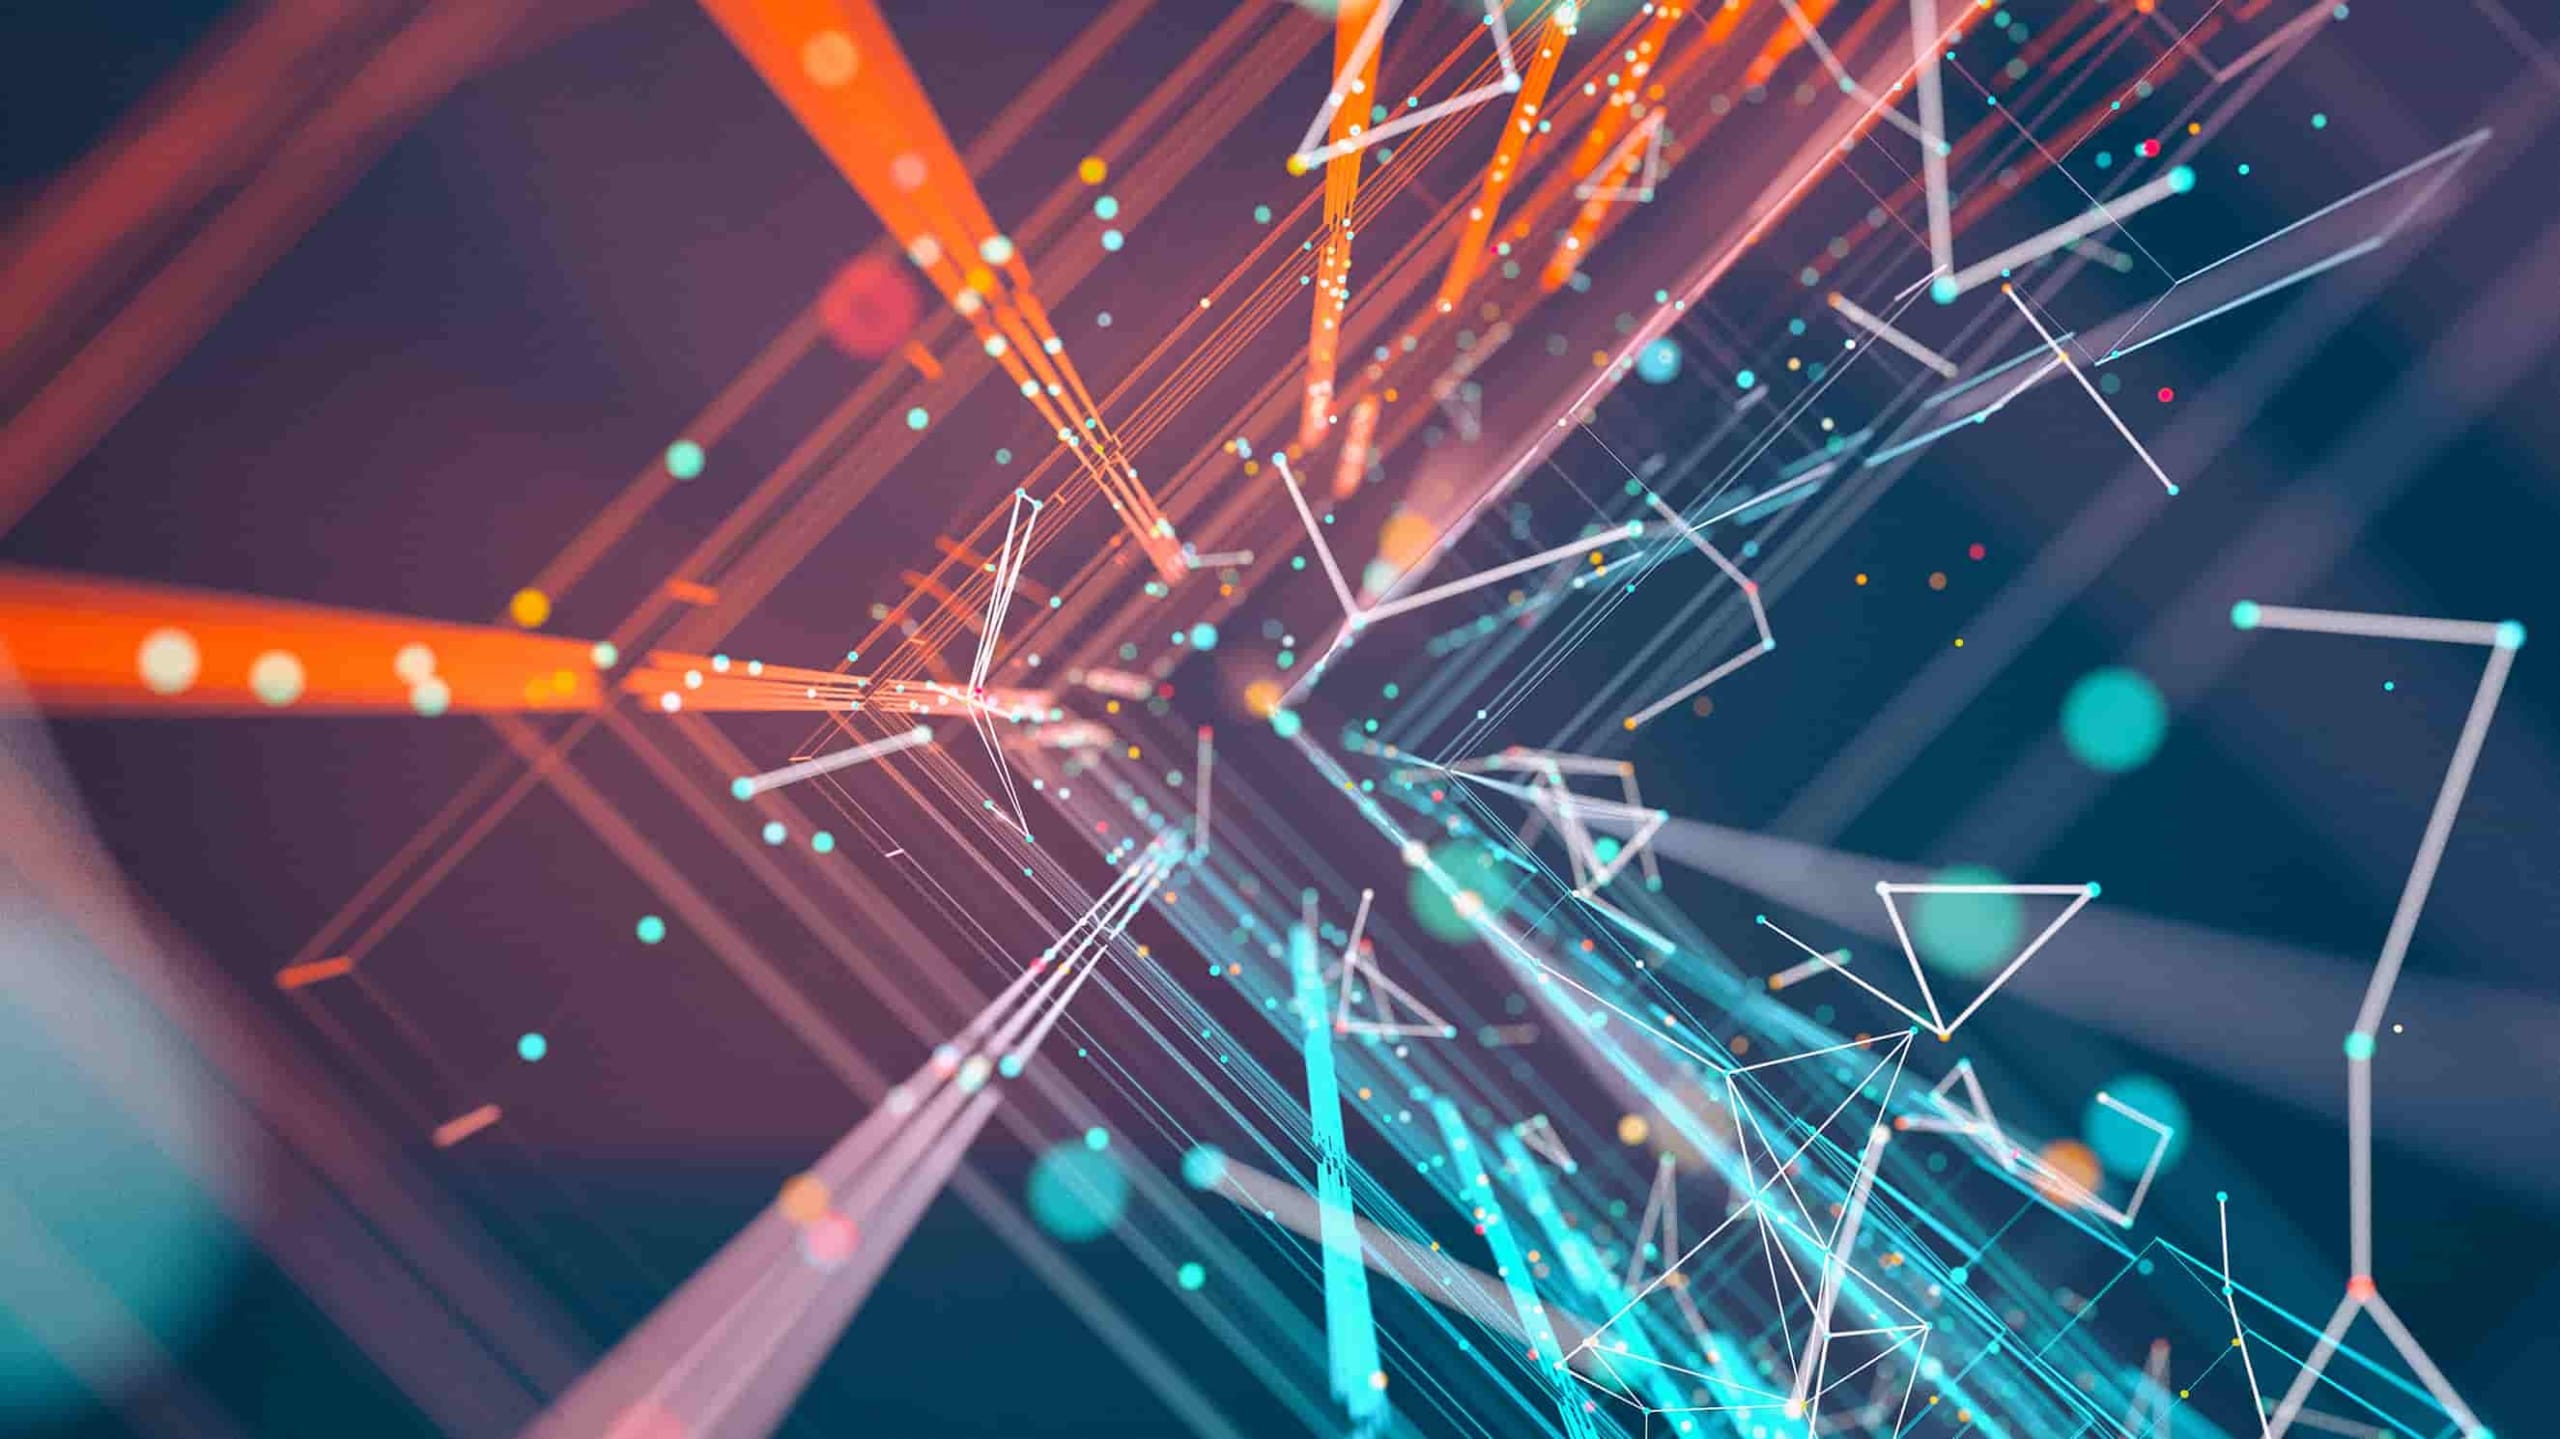 Abstract digital art featuring glowing lines and geometric shapes in orange and blue, conveying a sense of technological connectivity or data flow.